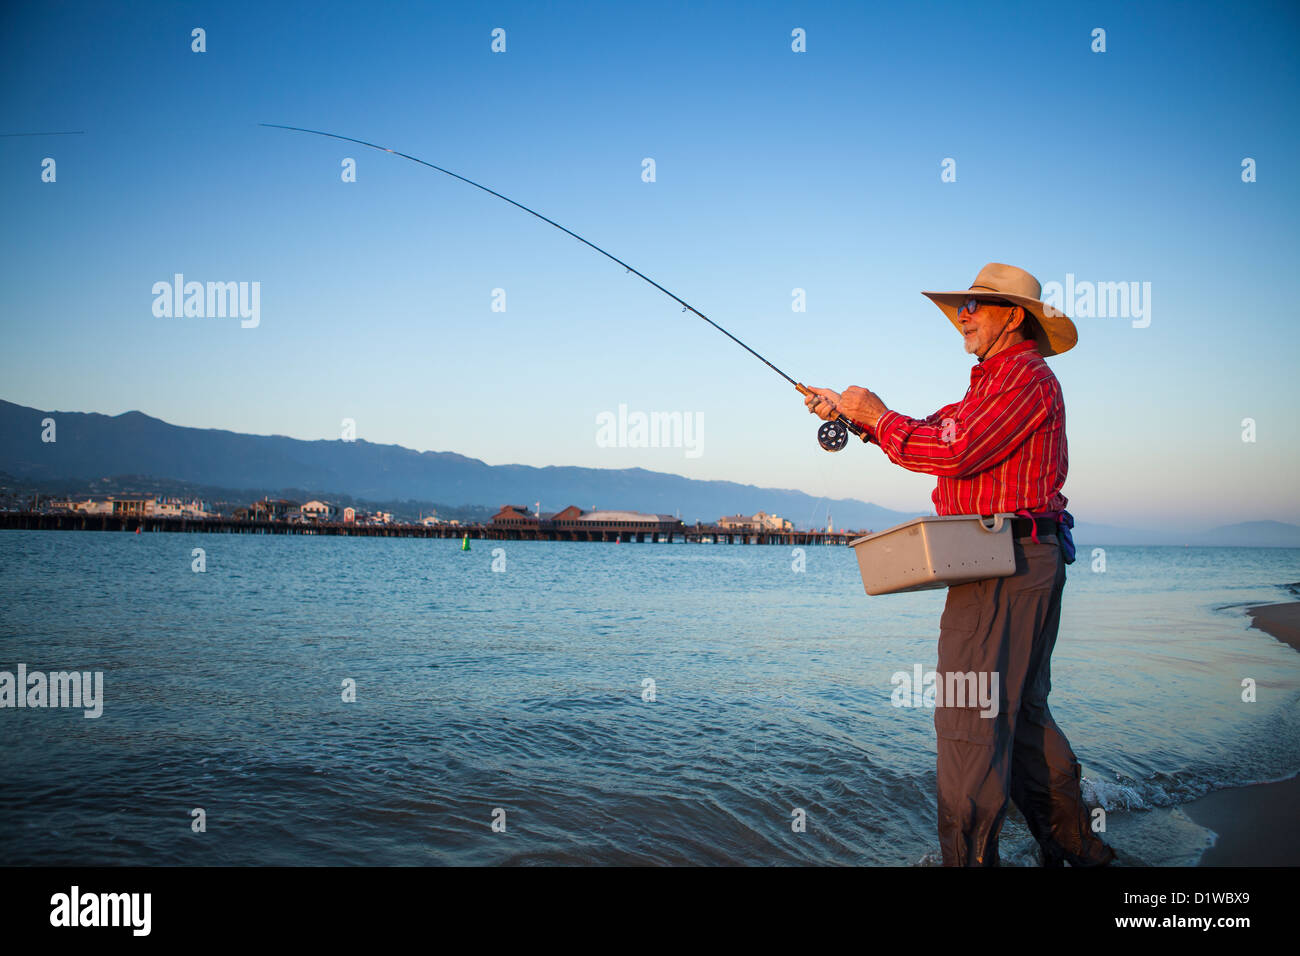 Saltwater flyfisherman casting for surf perch with the wharf in the background, harbor sandbar, Santa Barbara, California Stock Photo